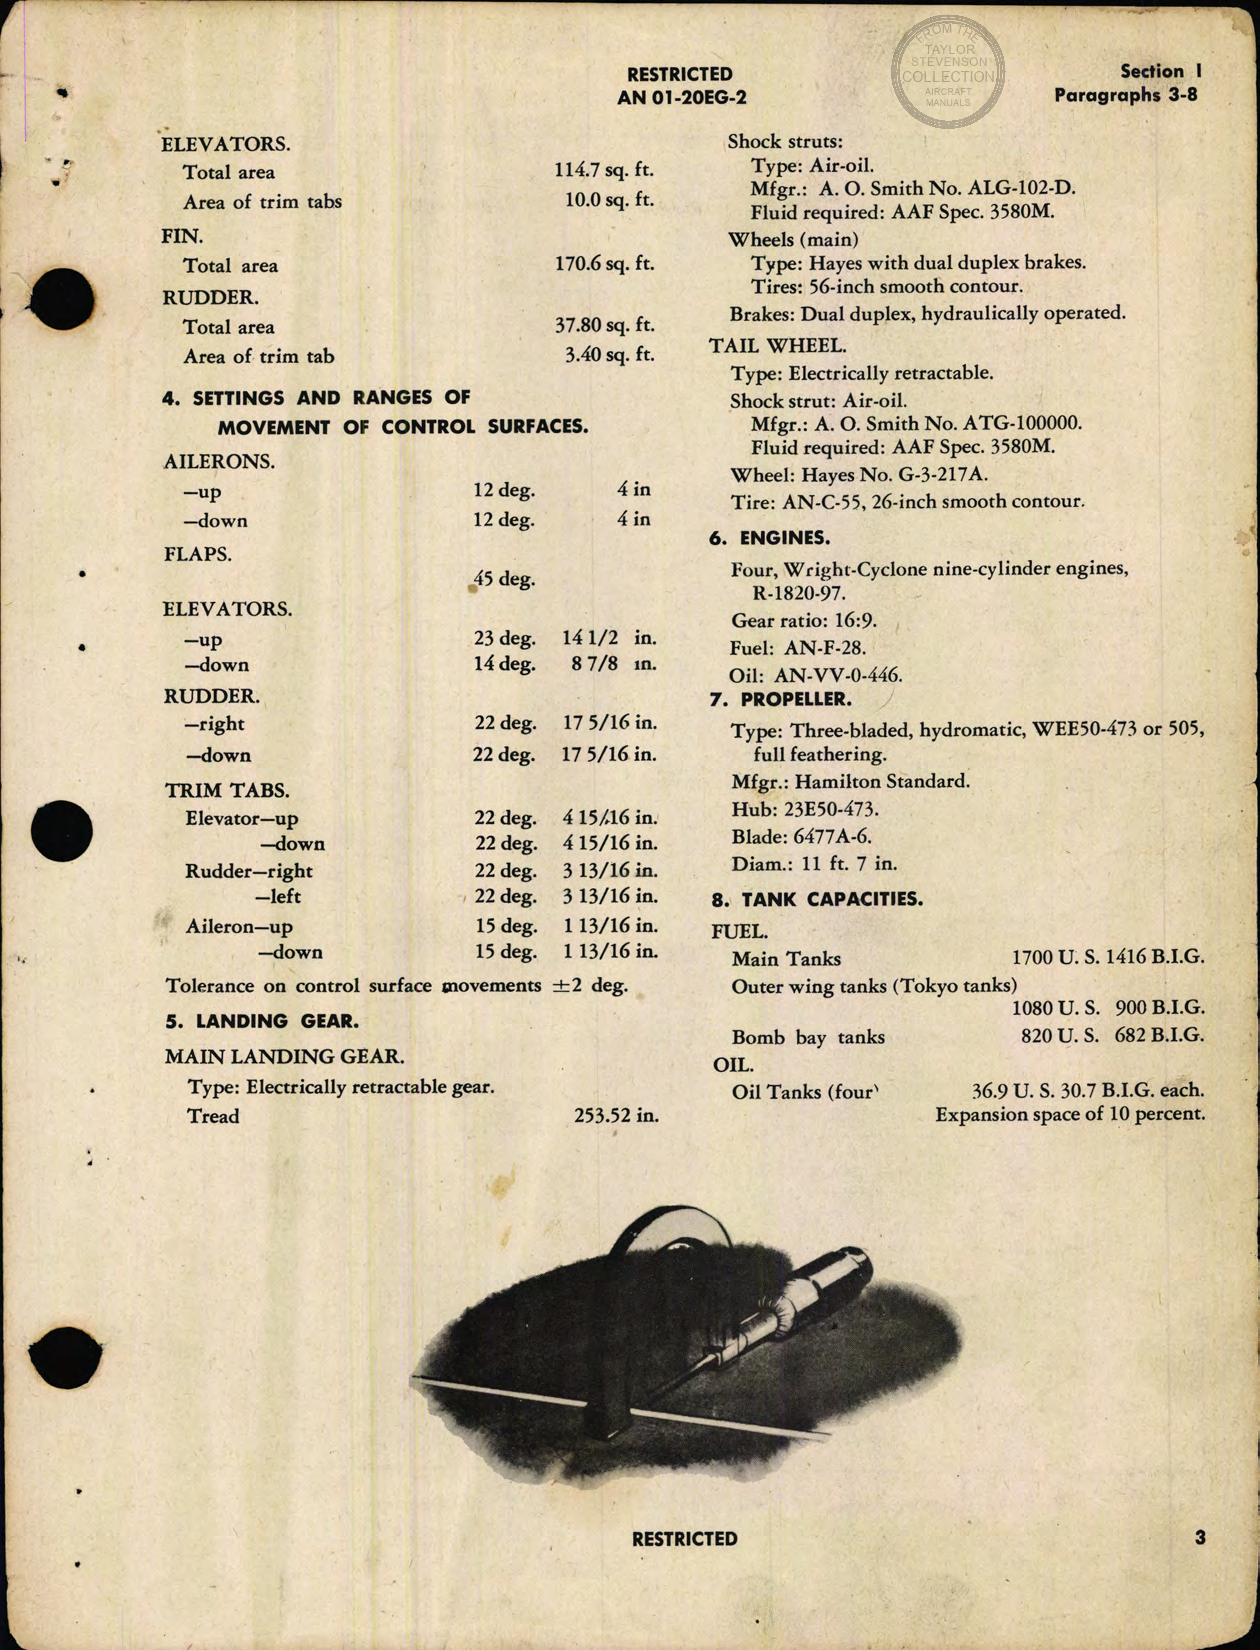 Sample page 5 from AirCorps Library document: Erection and Maintenance Instructions for B-17G (Fortress III) Airplanes